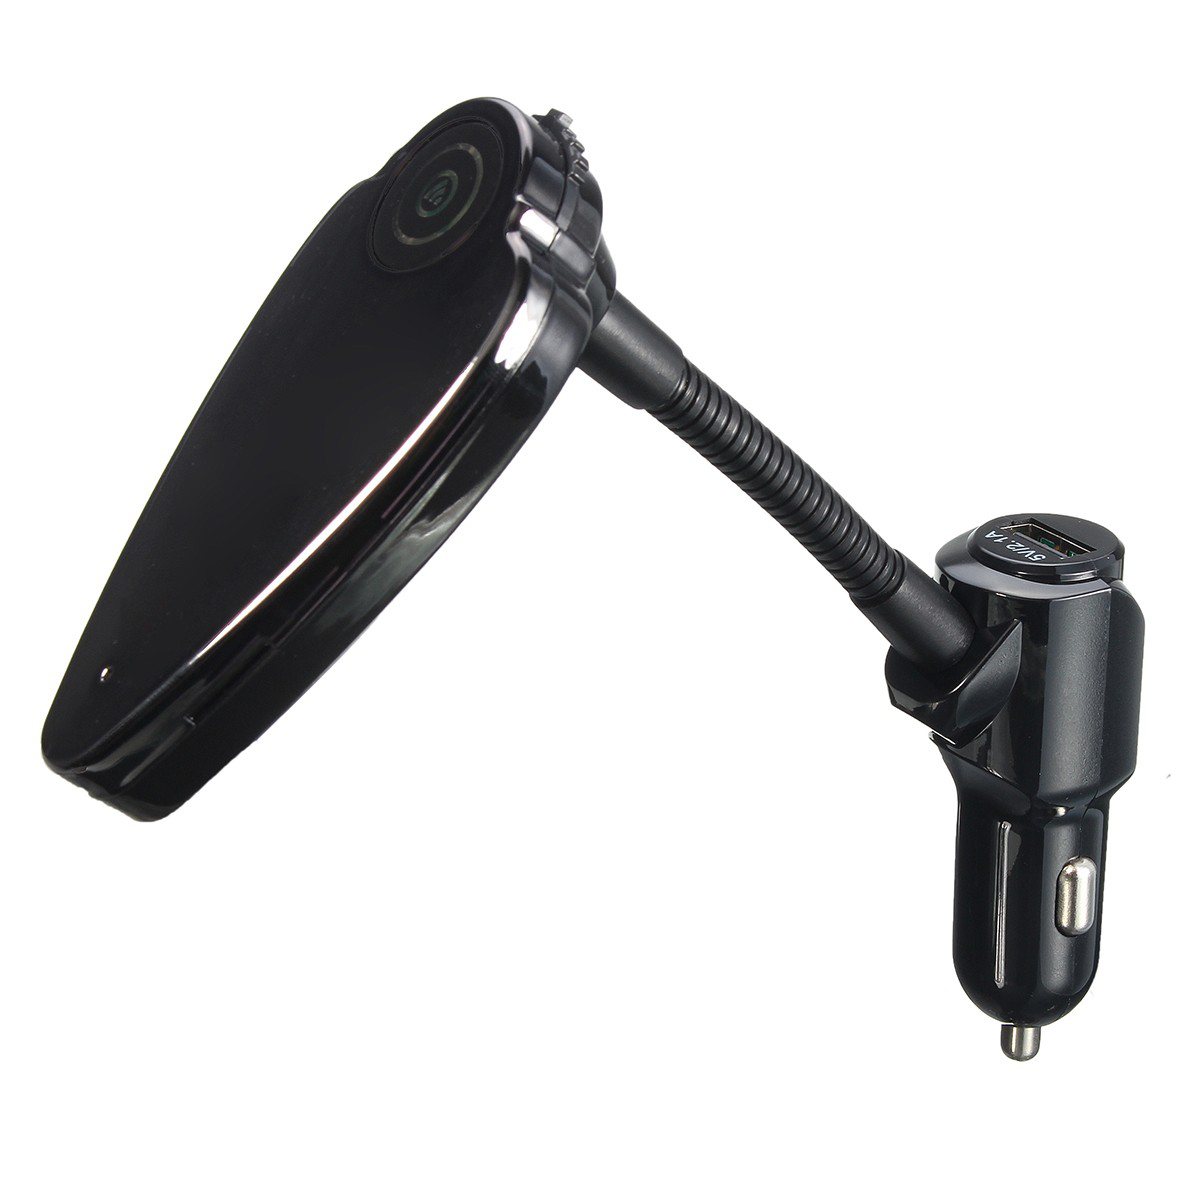 T6 LCD Display Car Charger Bluetooth Hands Free FM Transmitter Built-In Microphone MP3 Player